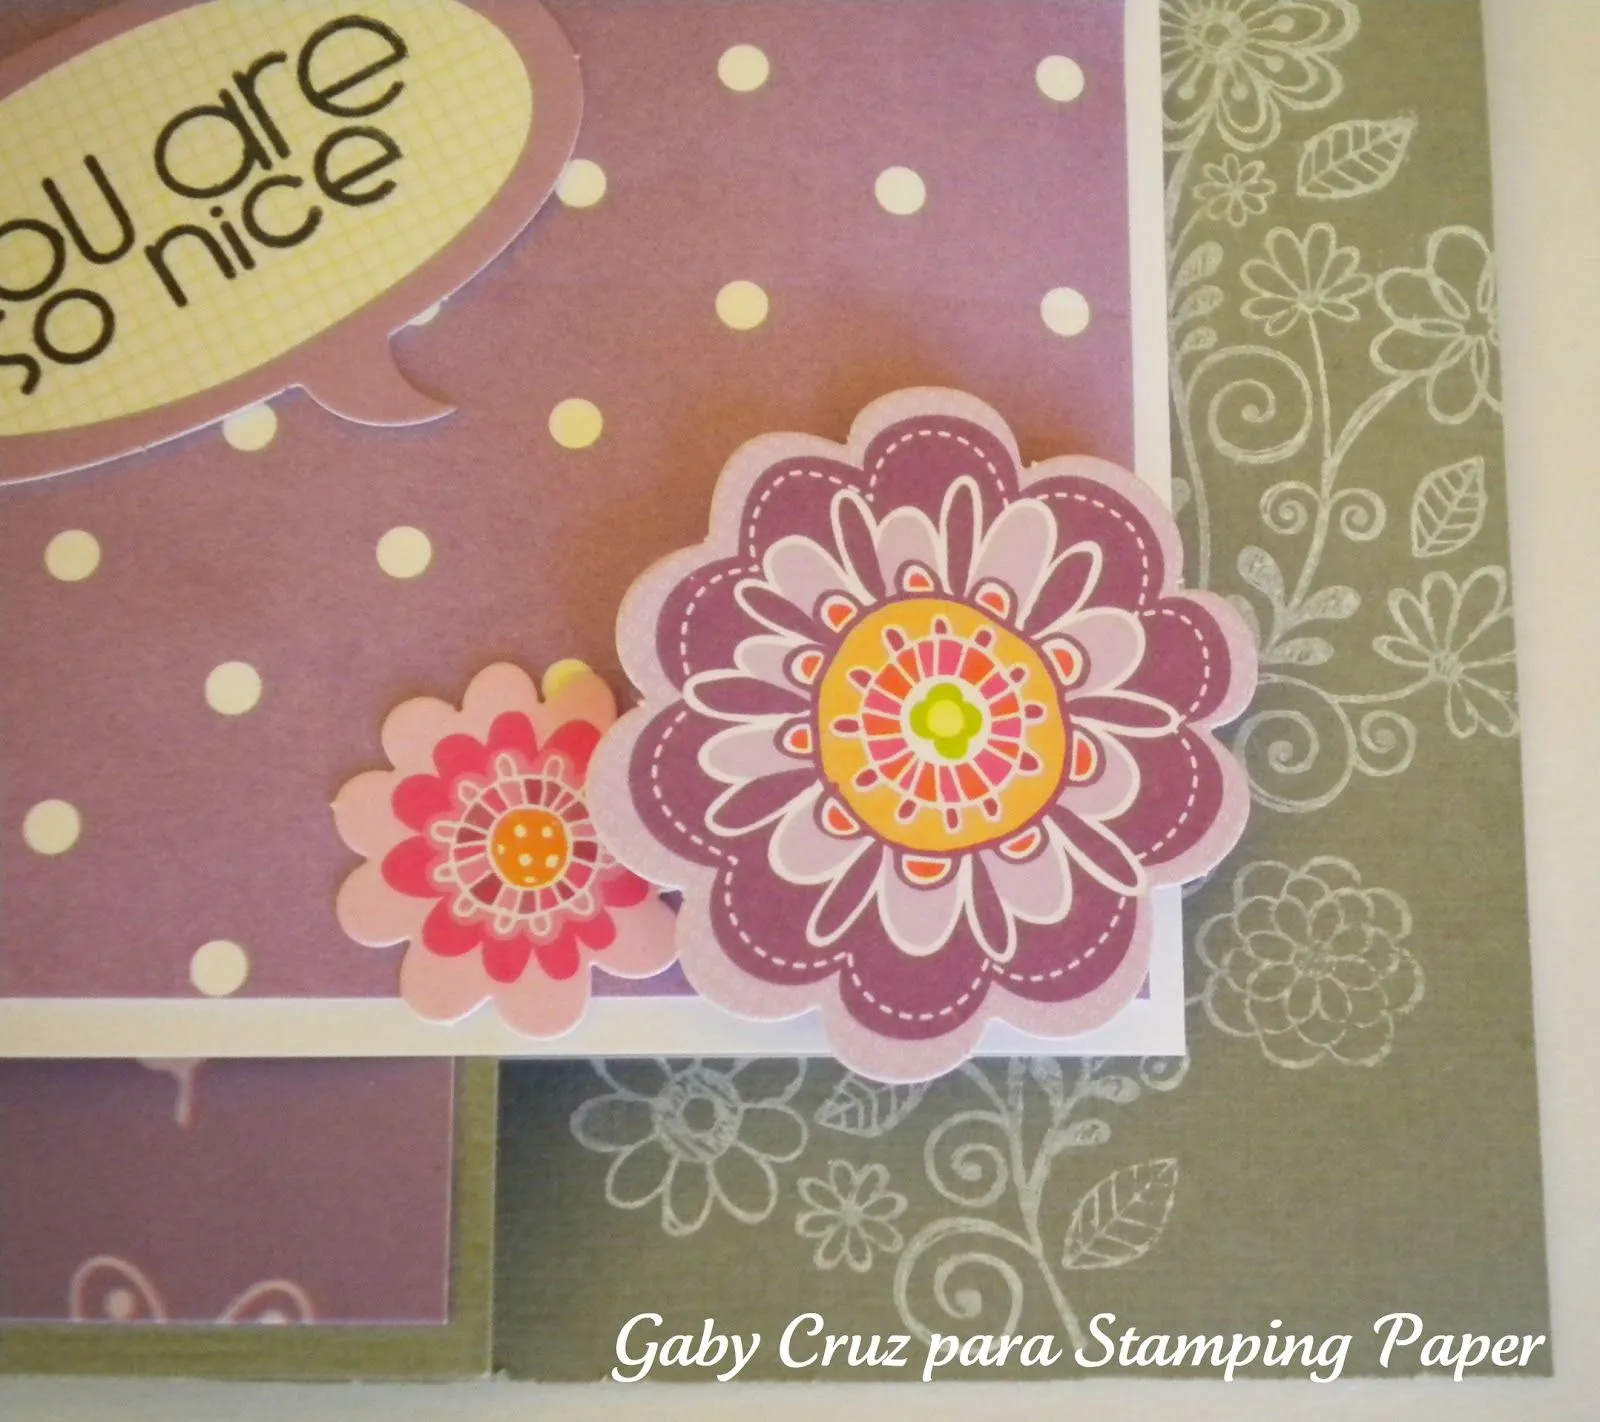 Stamping Paper: marzo 2012